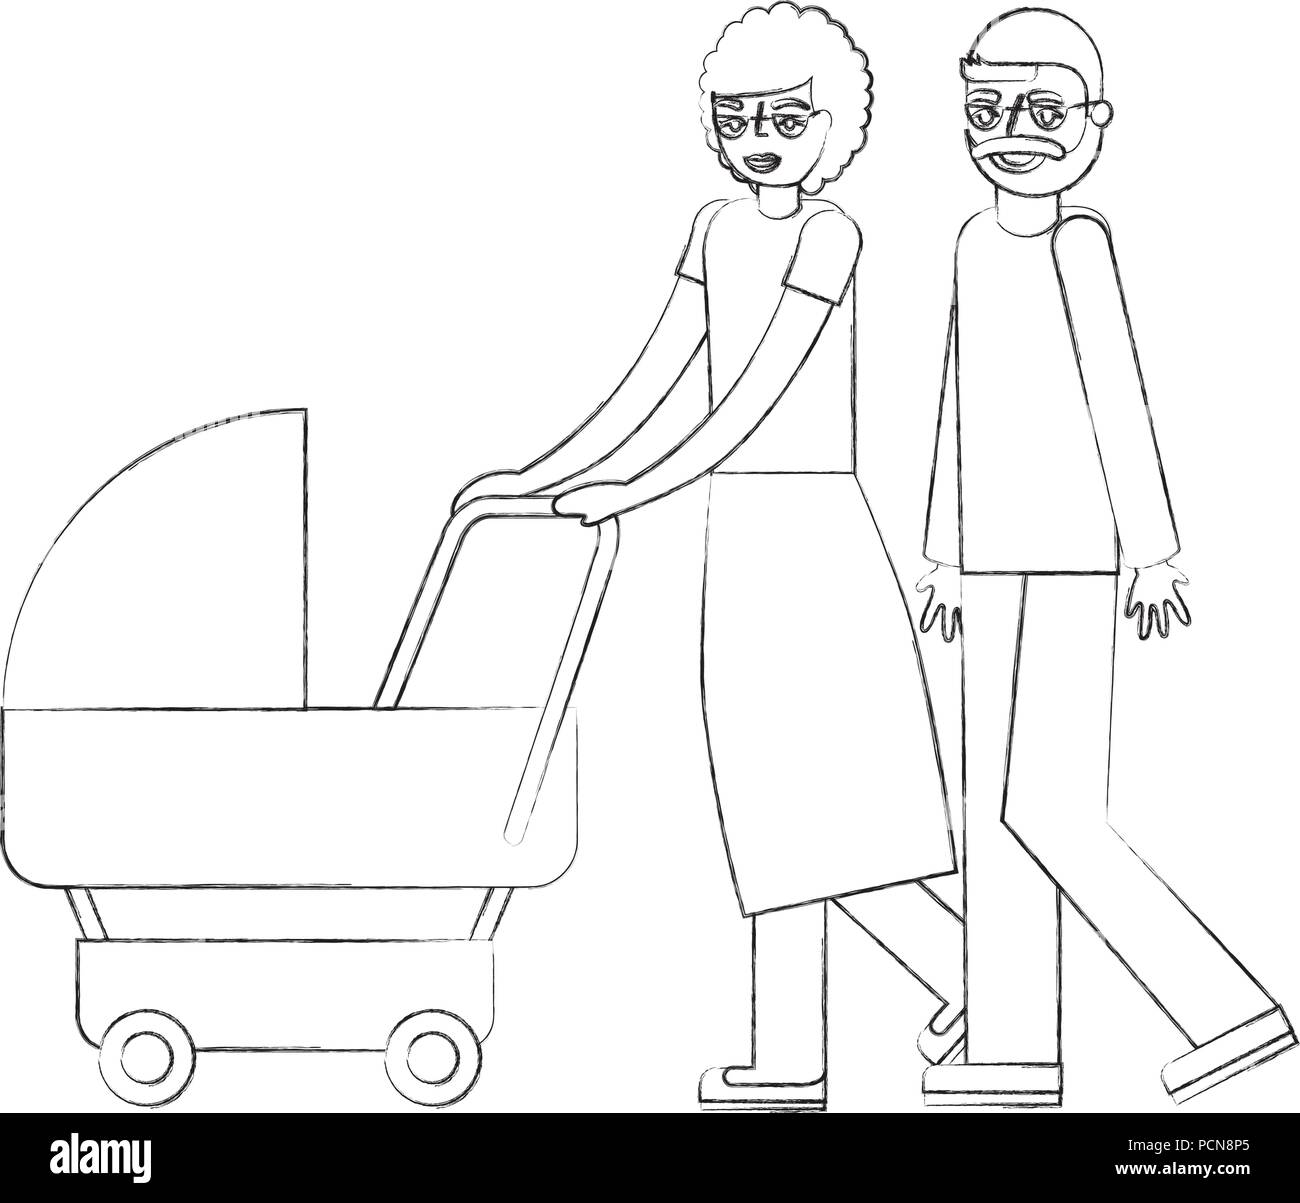 Black Grandmother Grandchild: Over 308 Royalty-Free Licensable Stock  Illustrations & Drawings | Shutterstock